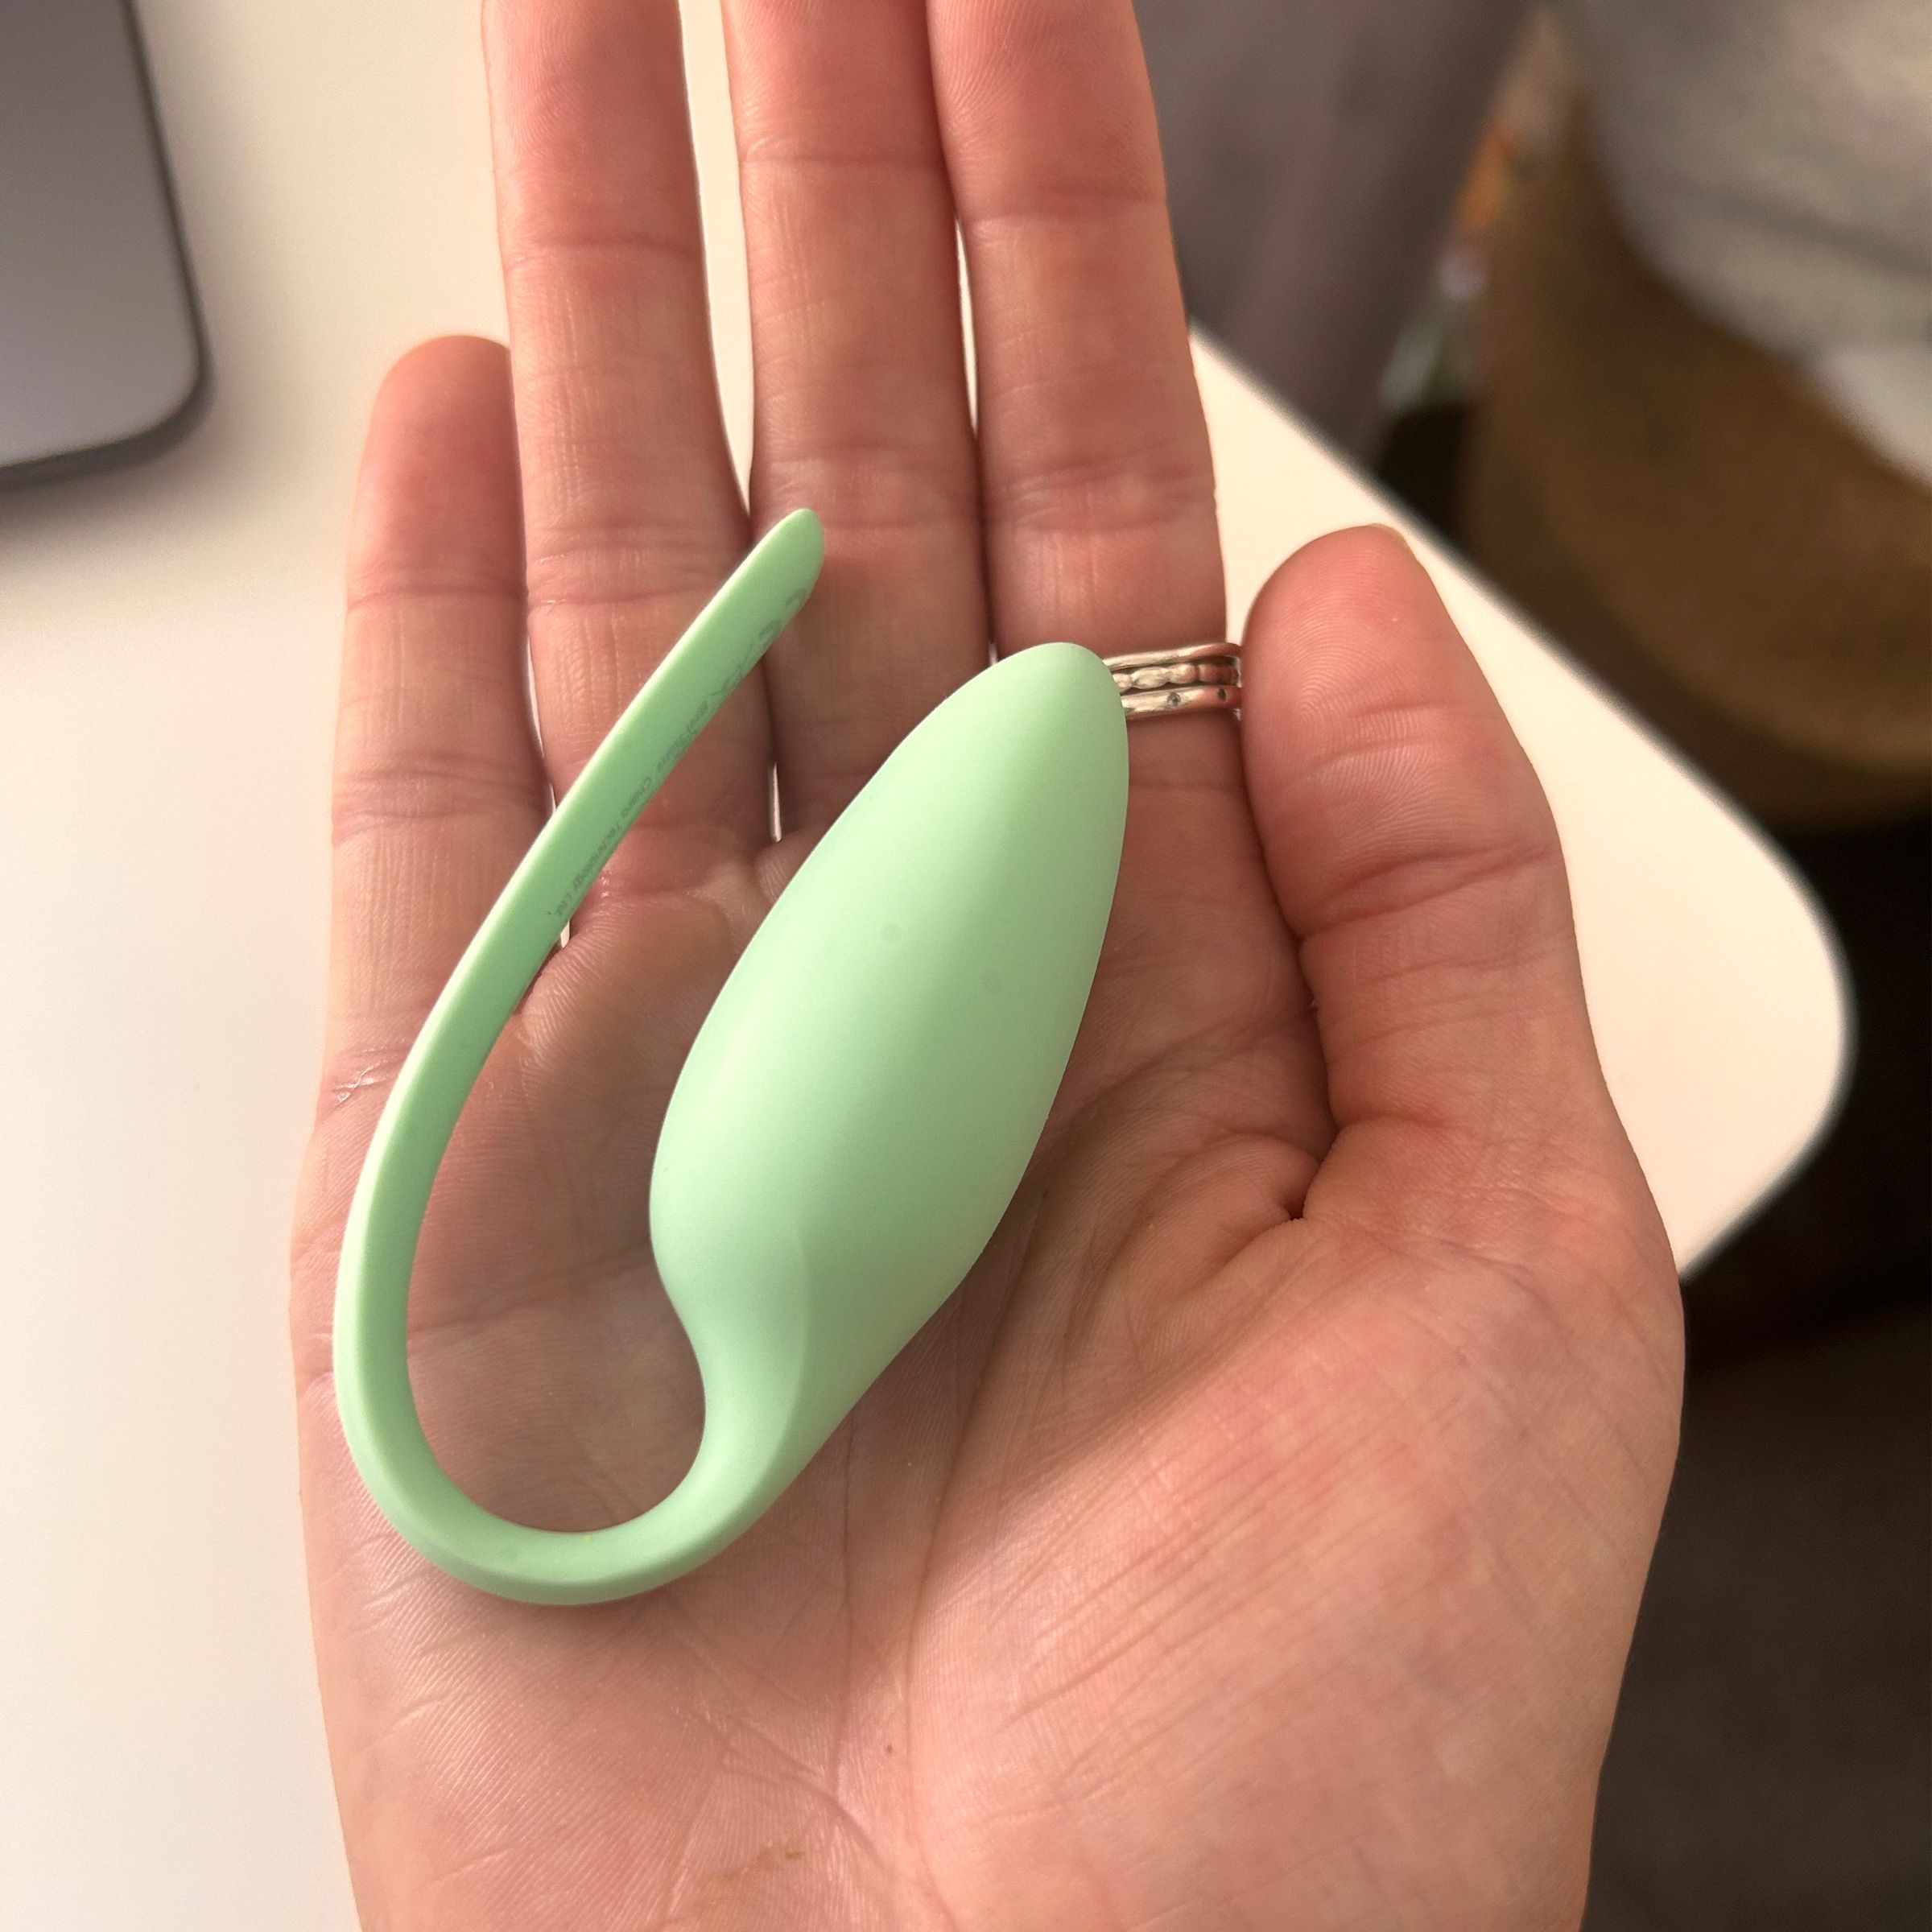 Image of an Elvie Floor Trainer in the palm of a hand to show how small it is